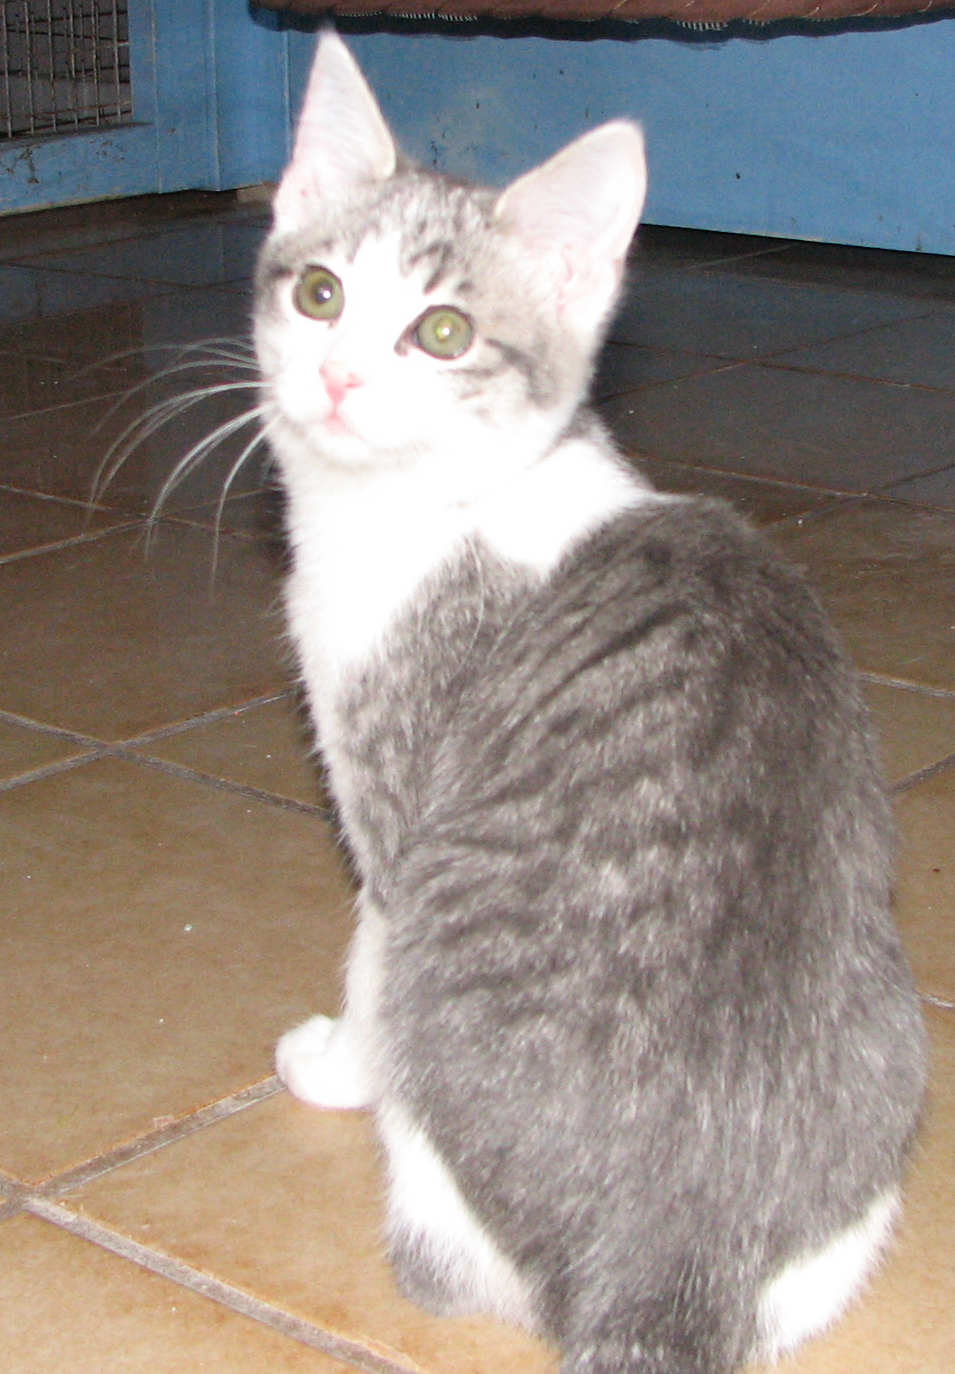 white and grey shorthair cat